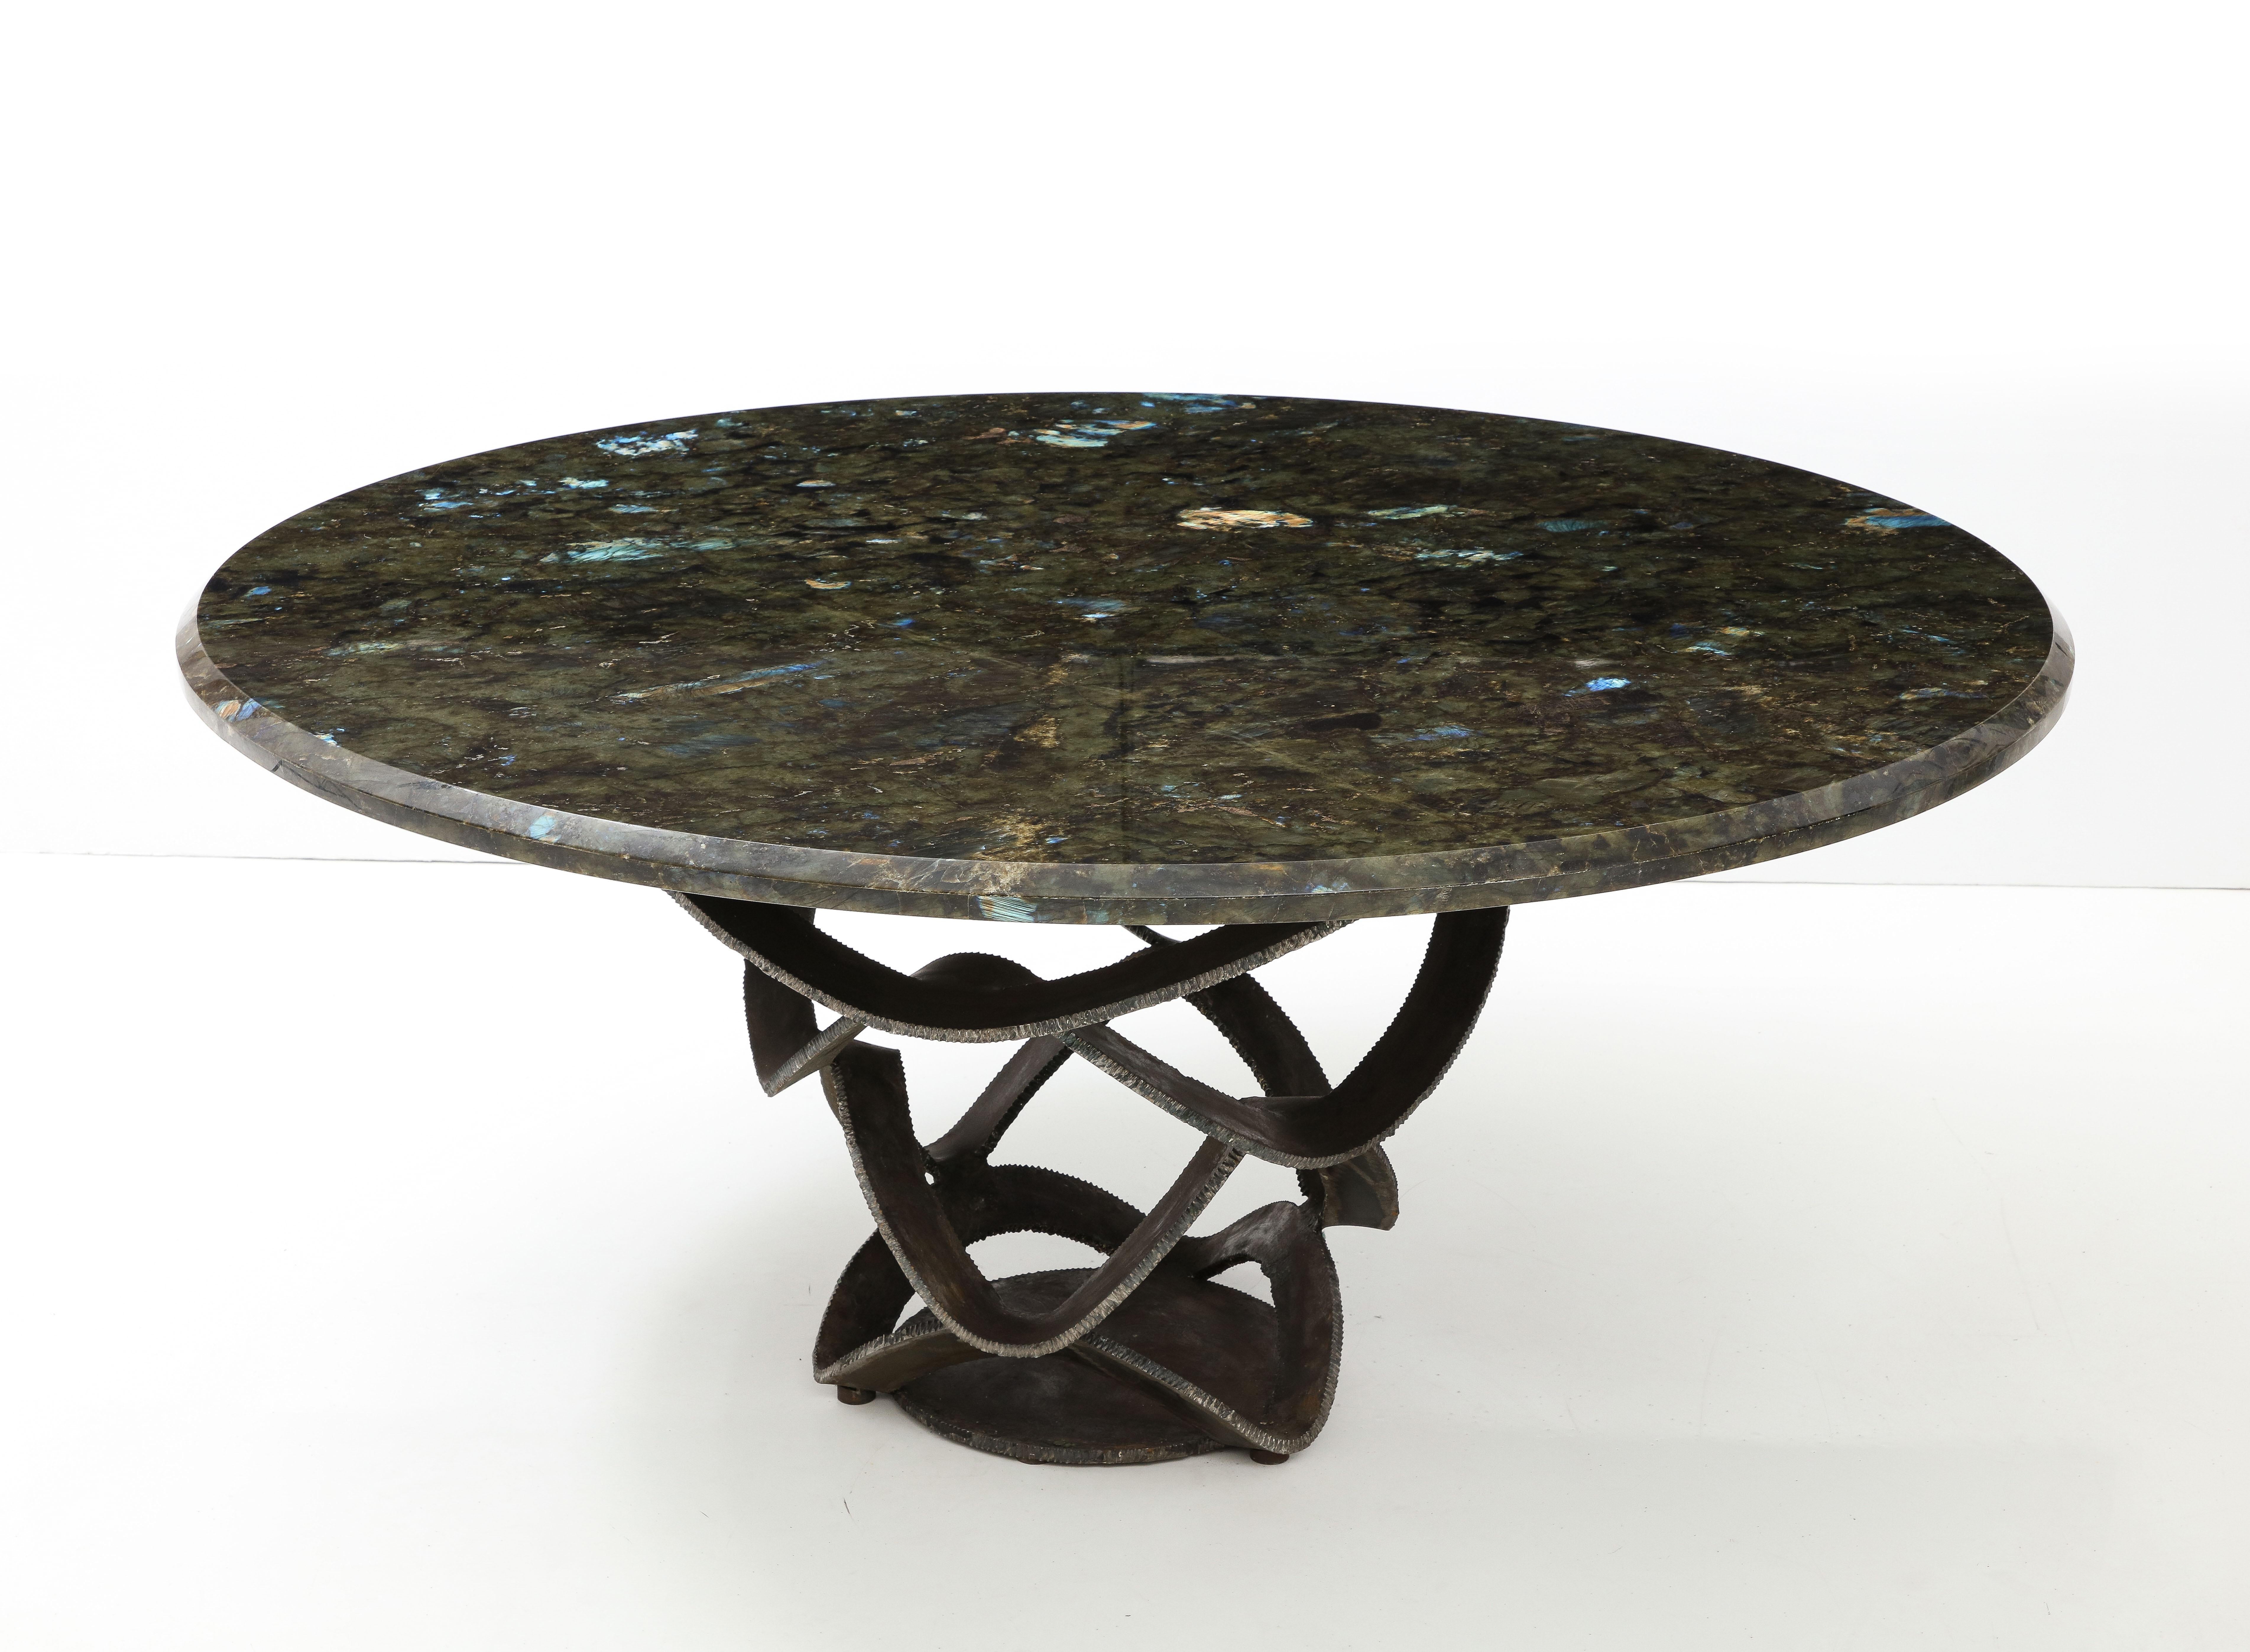 A beautiful luxurious French sculptural 1970s center or dining table composed of a forged iron base and a beautiful labradorite stone top. 